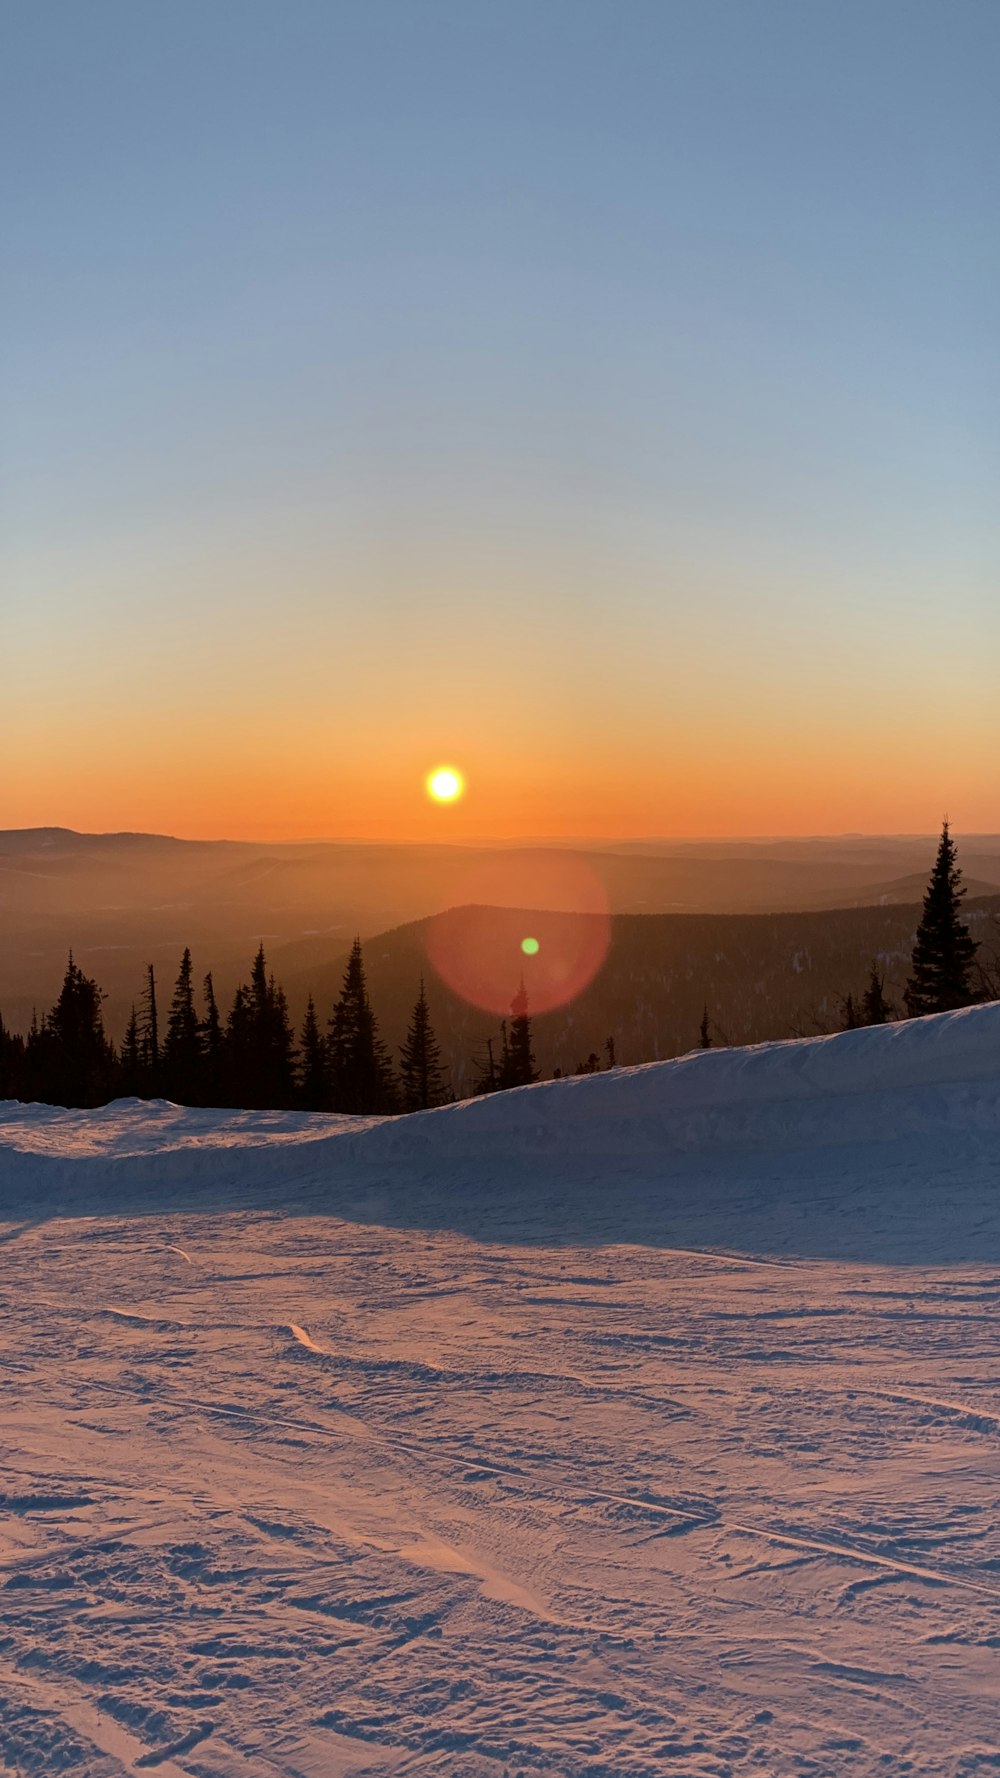 the sun is setting over a snowy mountain